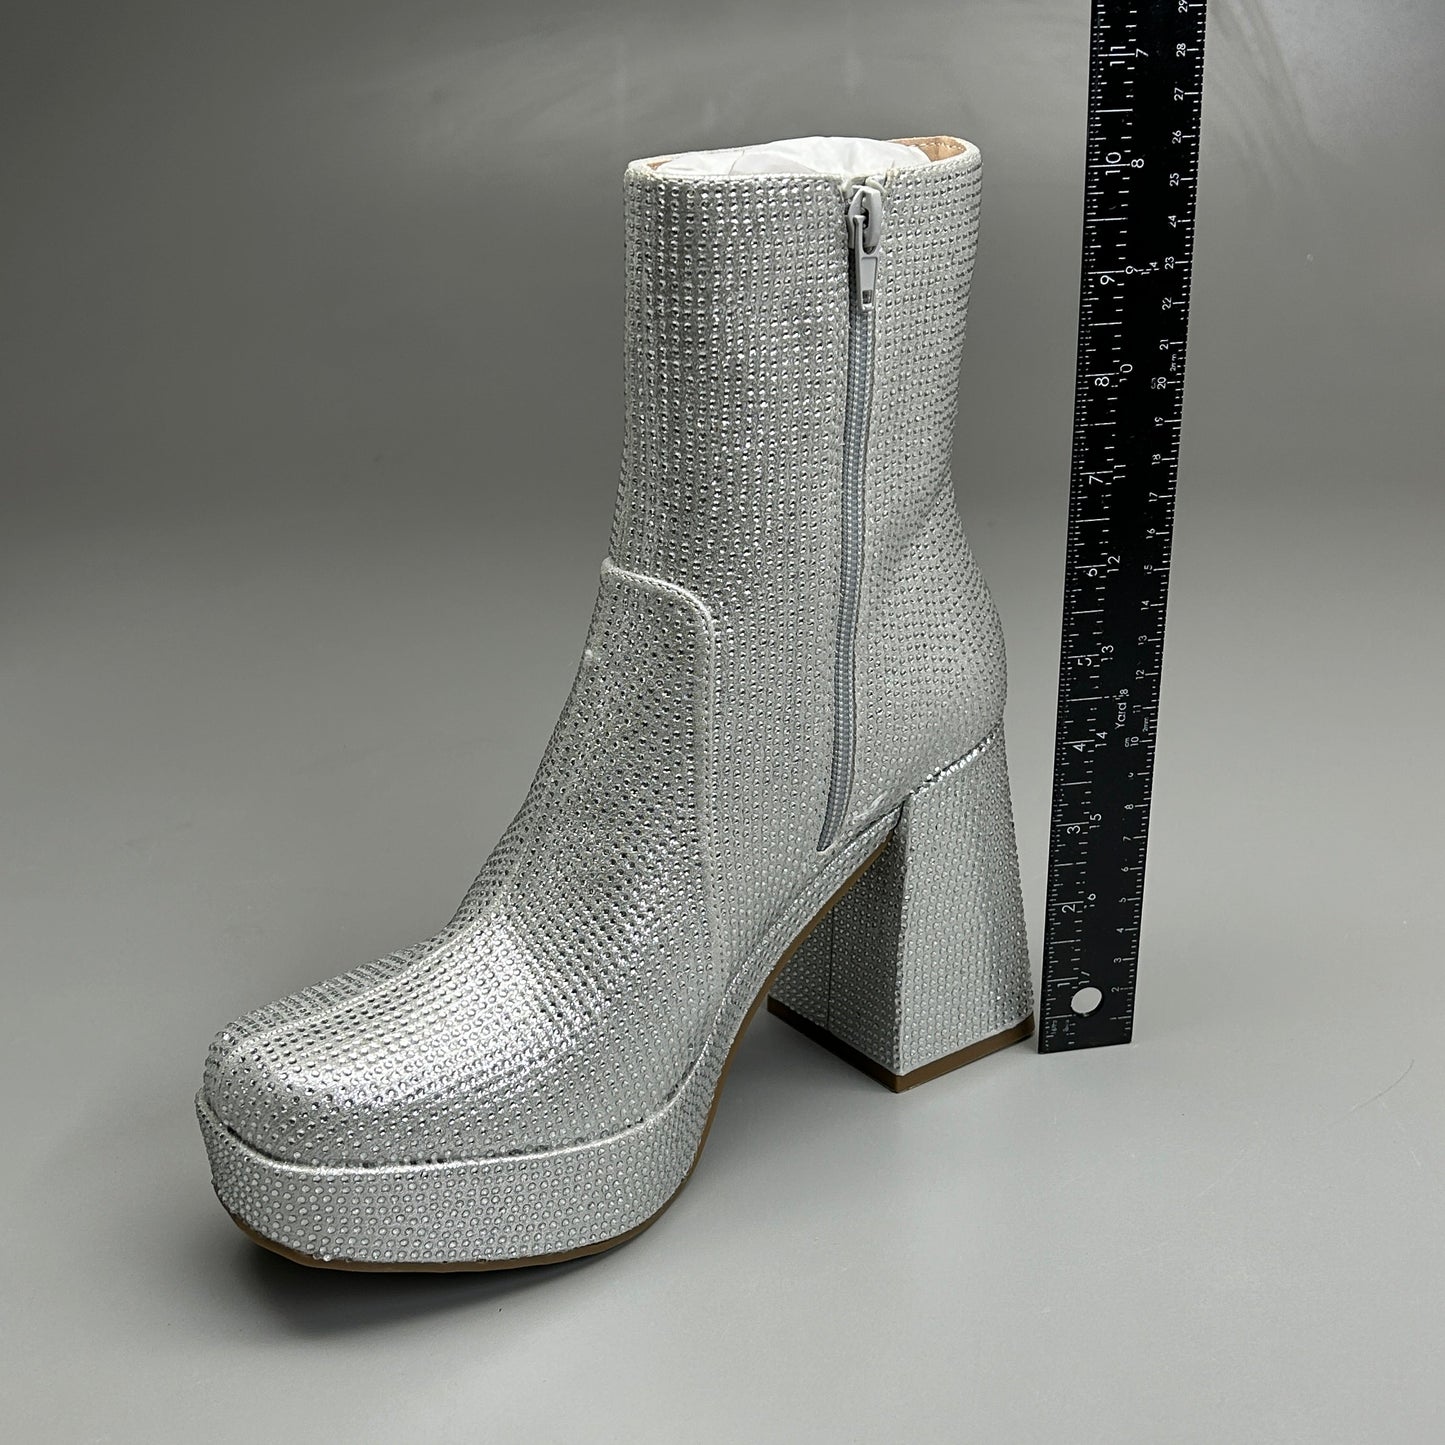 MIA Iva Silver Stone Heeled Boots Women's Sz 10 Silver GS1253108 (New)